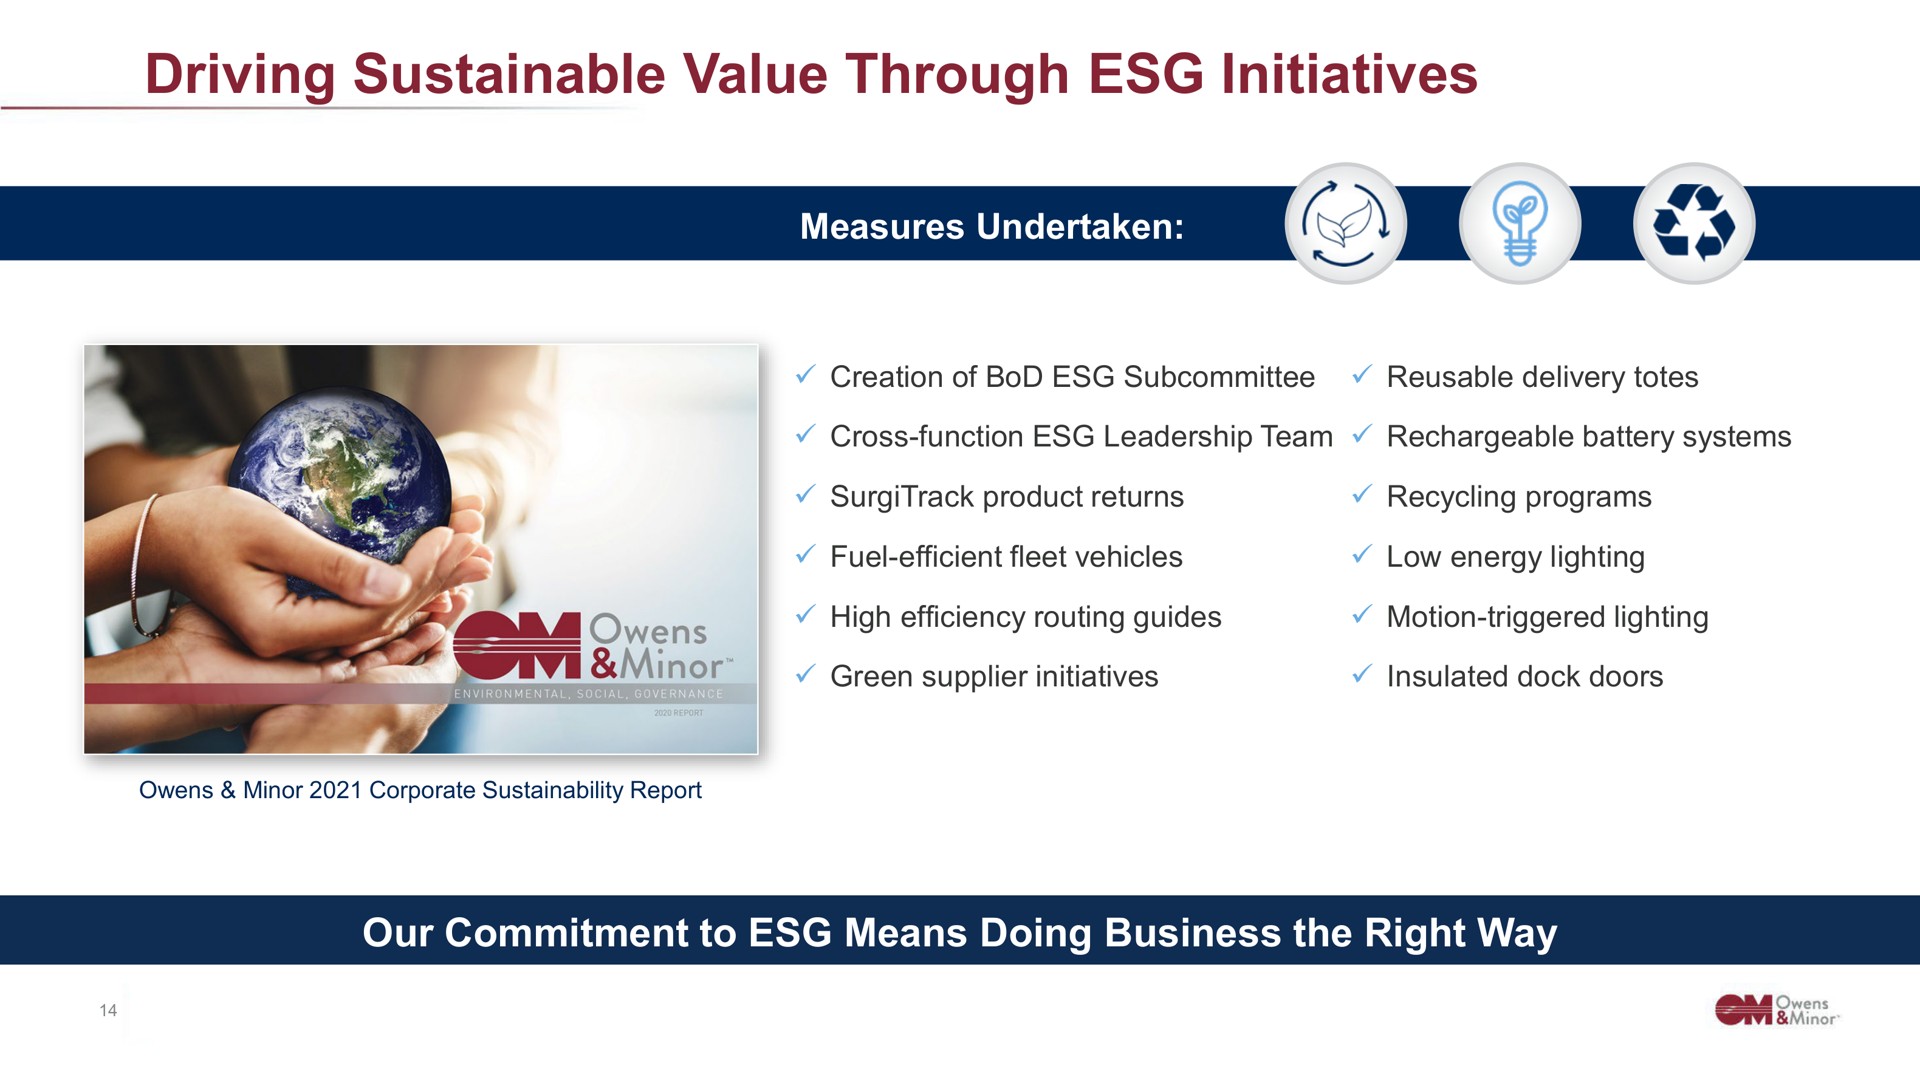 driving sustainable value through initiatives our commitment to means doing business the right way a | Owens&Minor